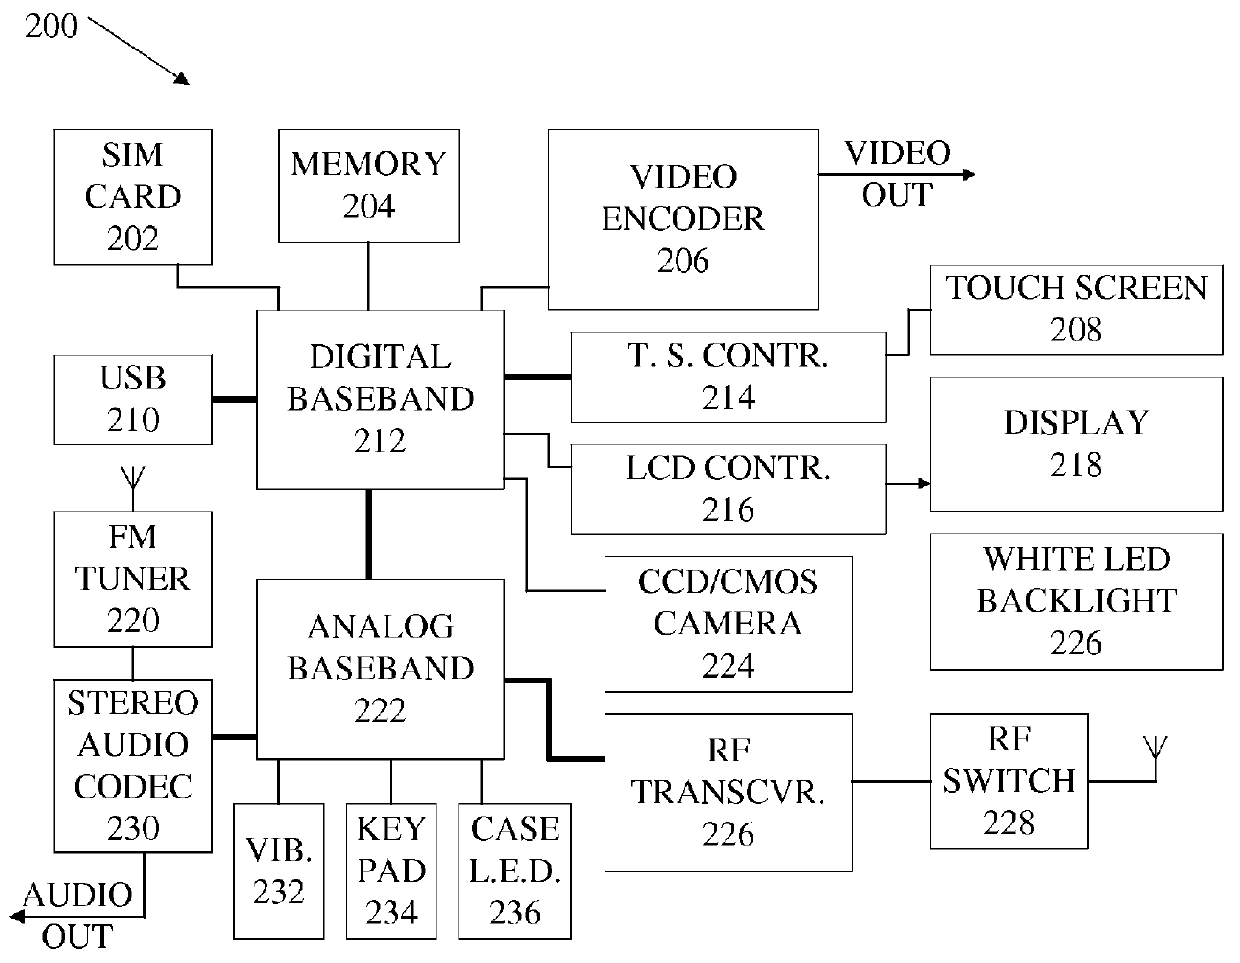 Ambient information for usage of wireless communication devices